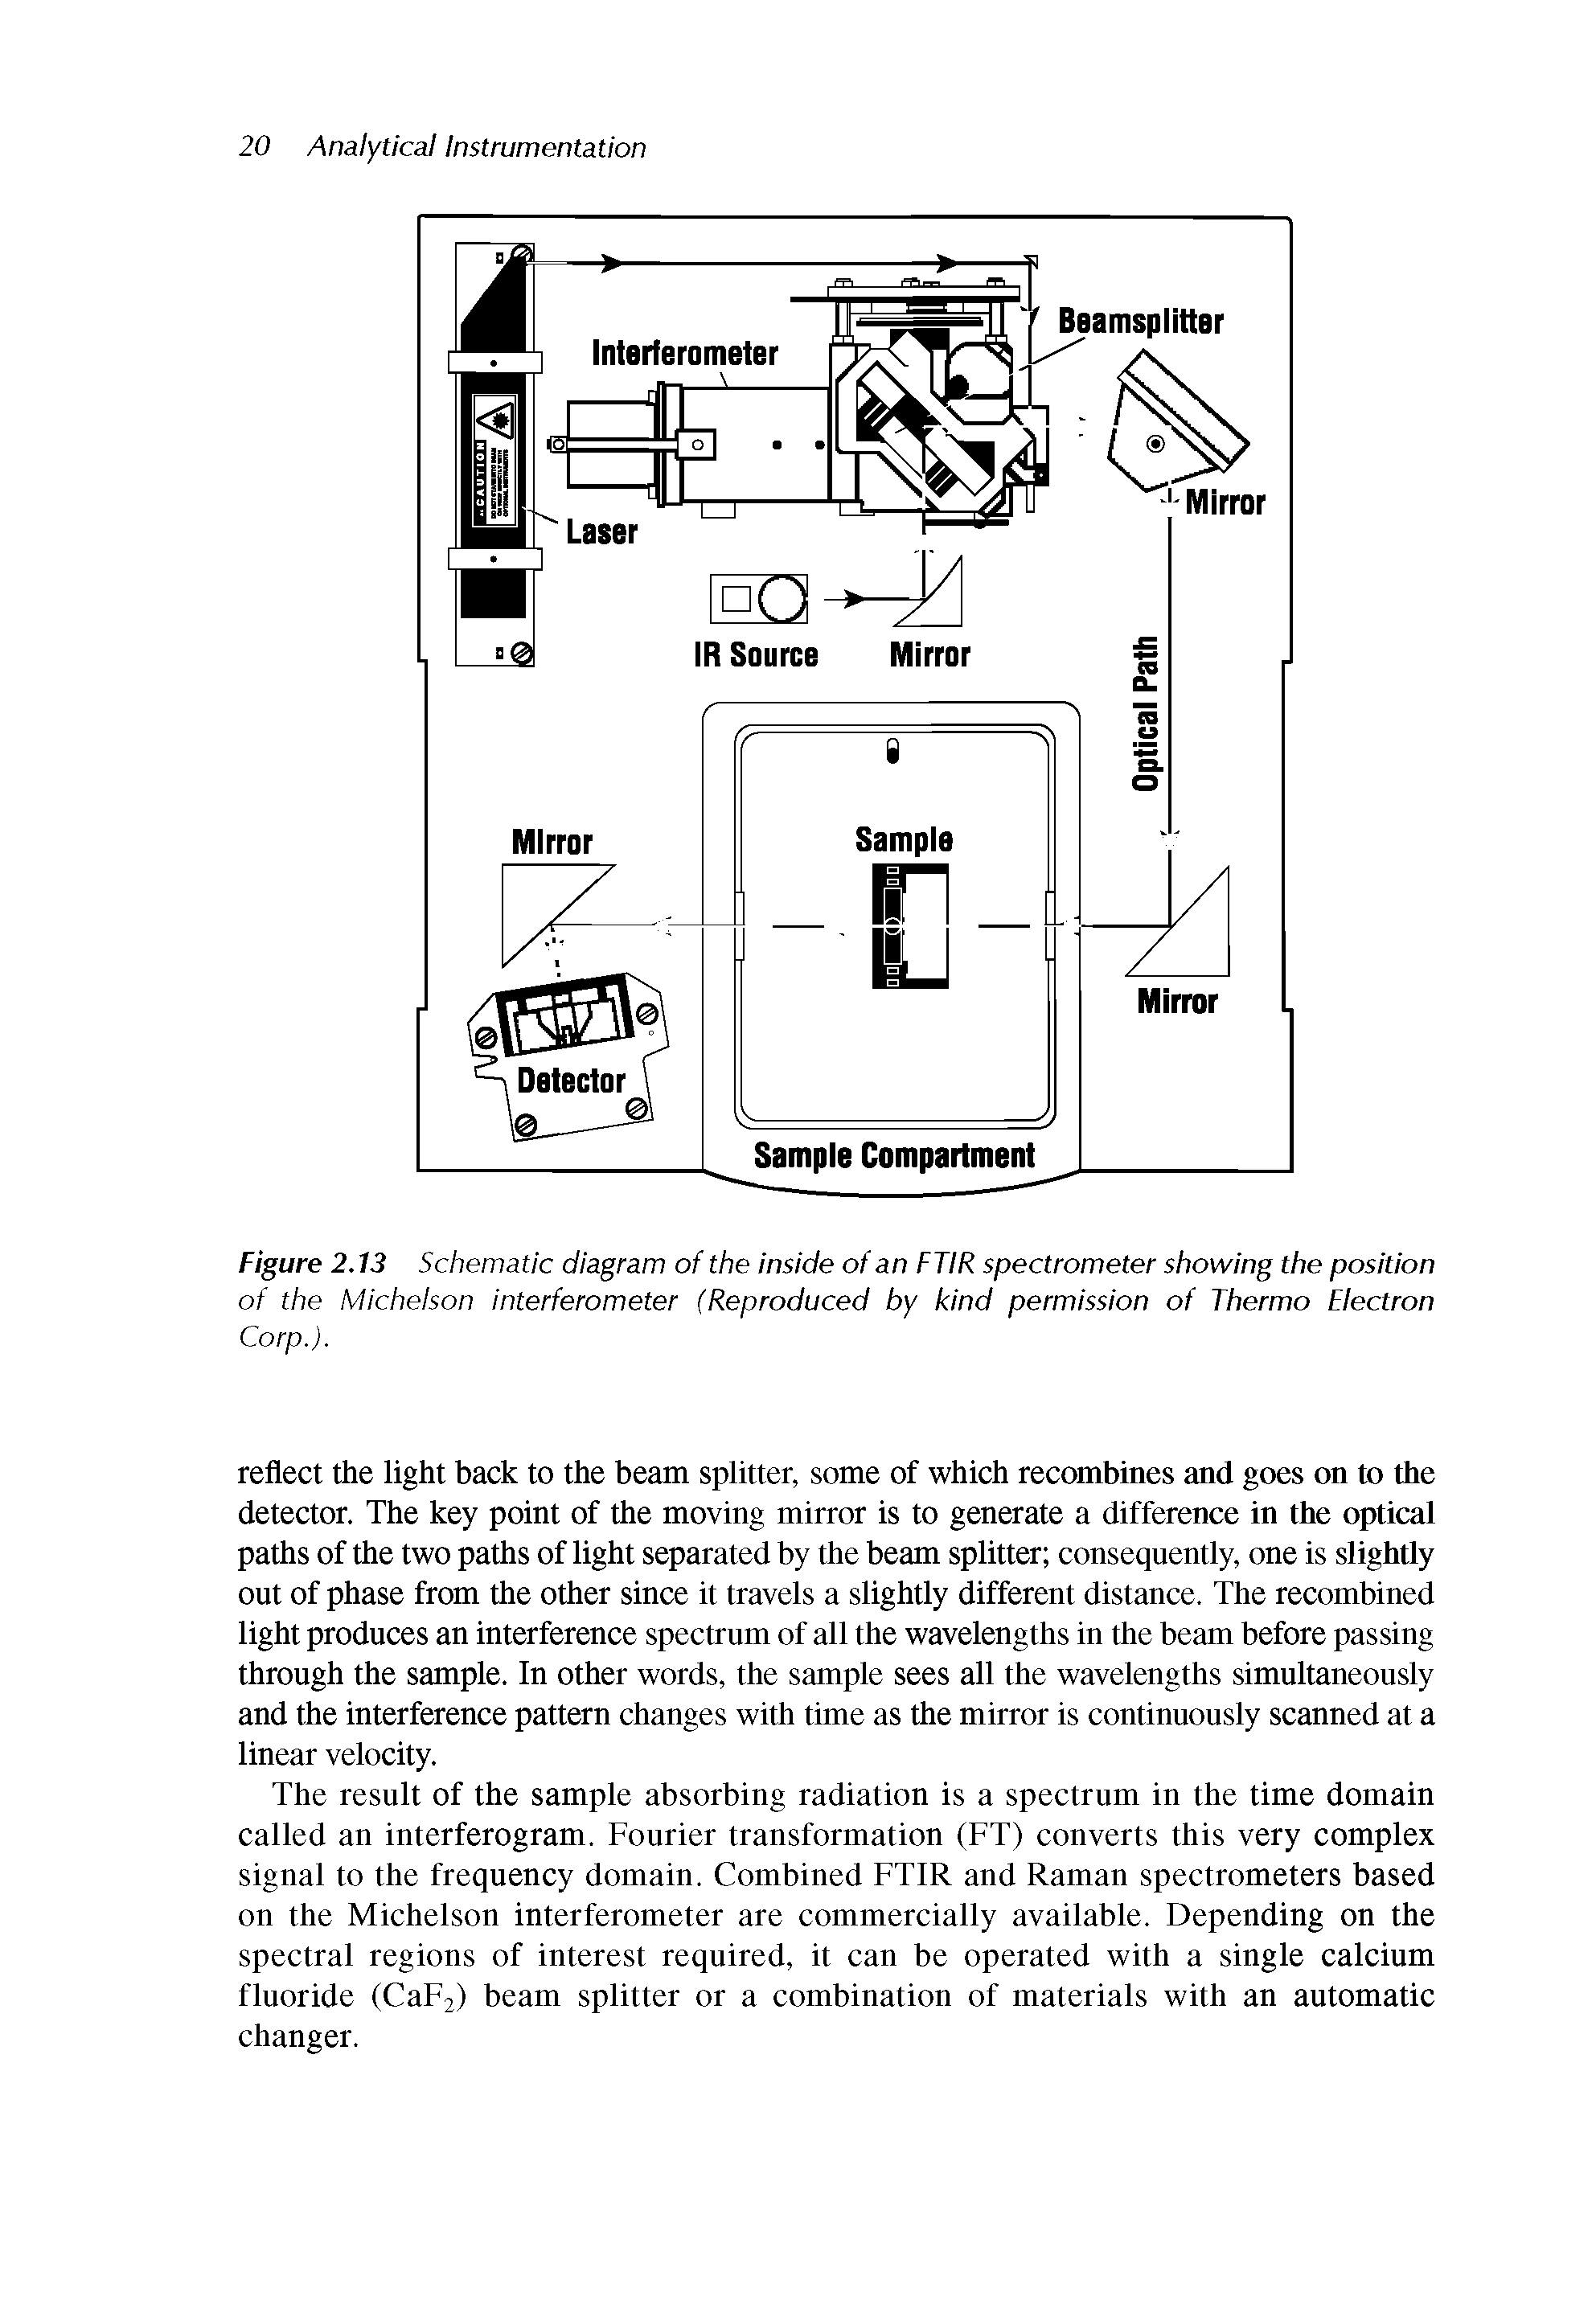 Figure 2.13 Schematic diagram of the inside of an FTIR spectrometer showing the position of the Michelson interferometer (Reproduced by kind permission of Thermo Electron Corp.).